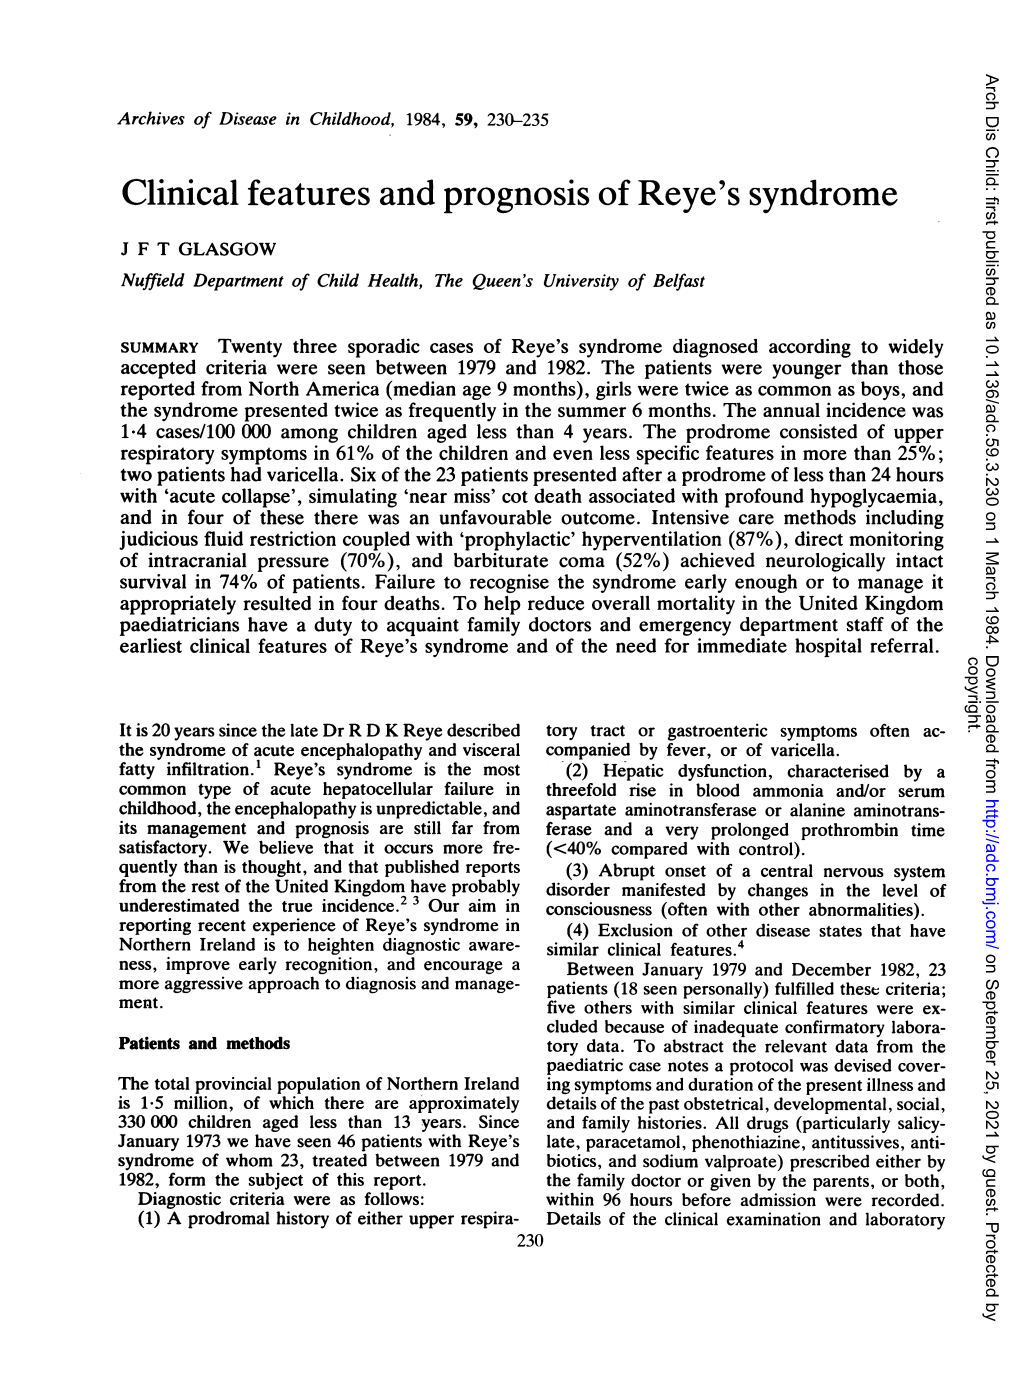 Clinical Features and Prognosis of Reye's Syndrome